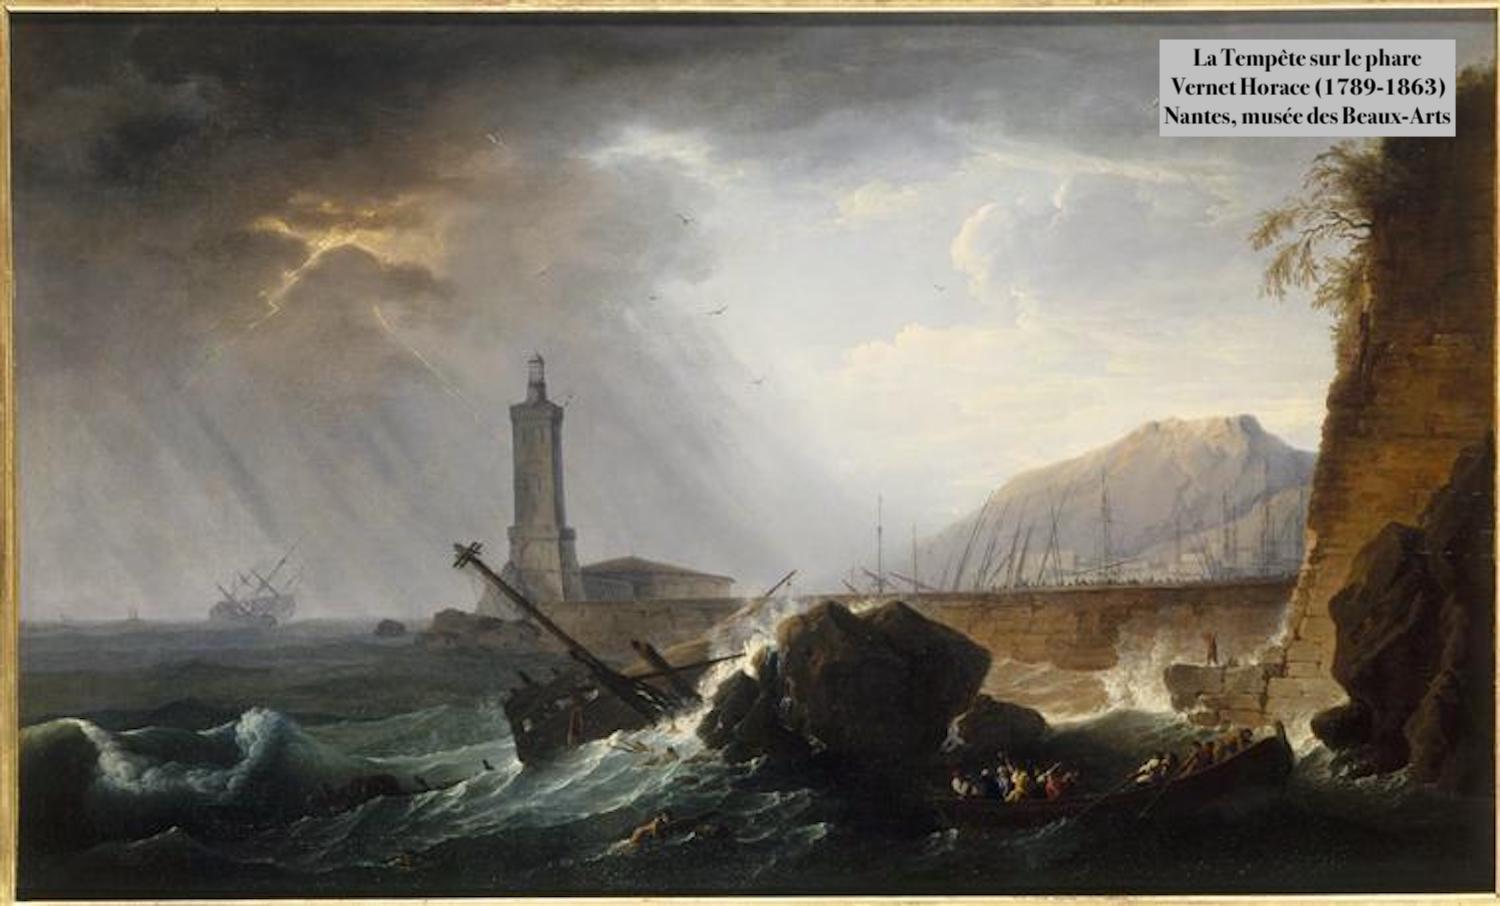 Storm See Water Landscape Vernet 18th Century Paint Oil on canvas Old master  10